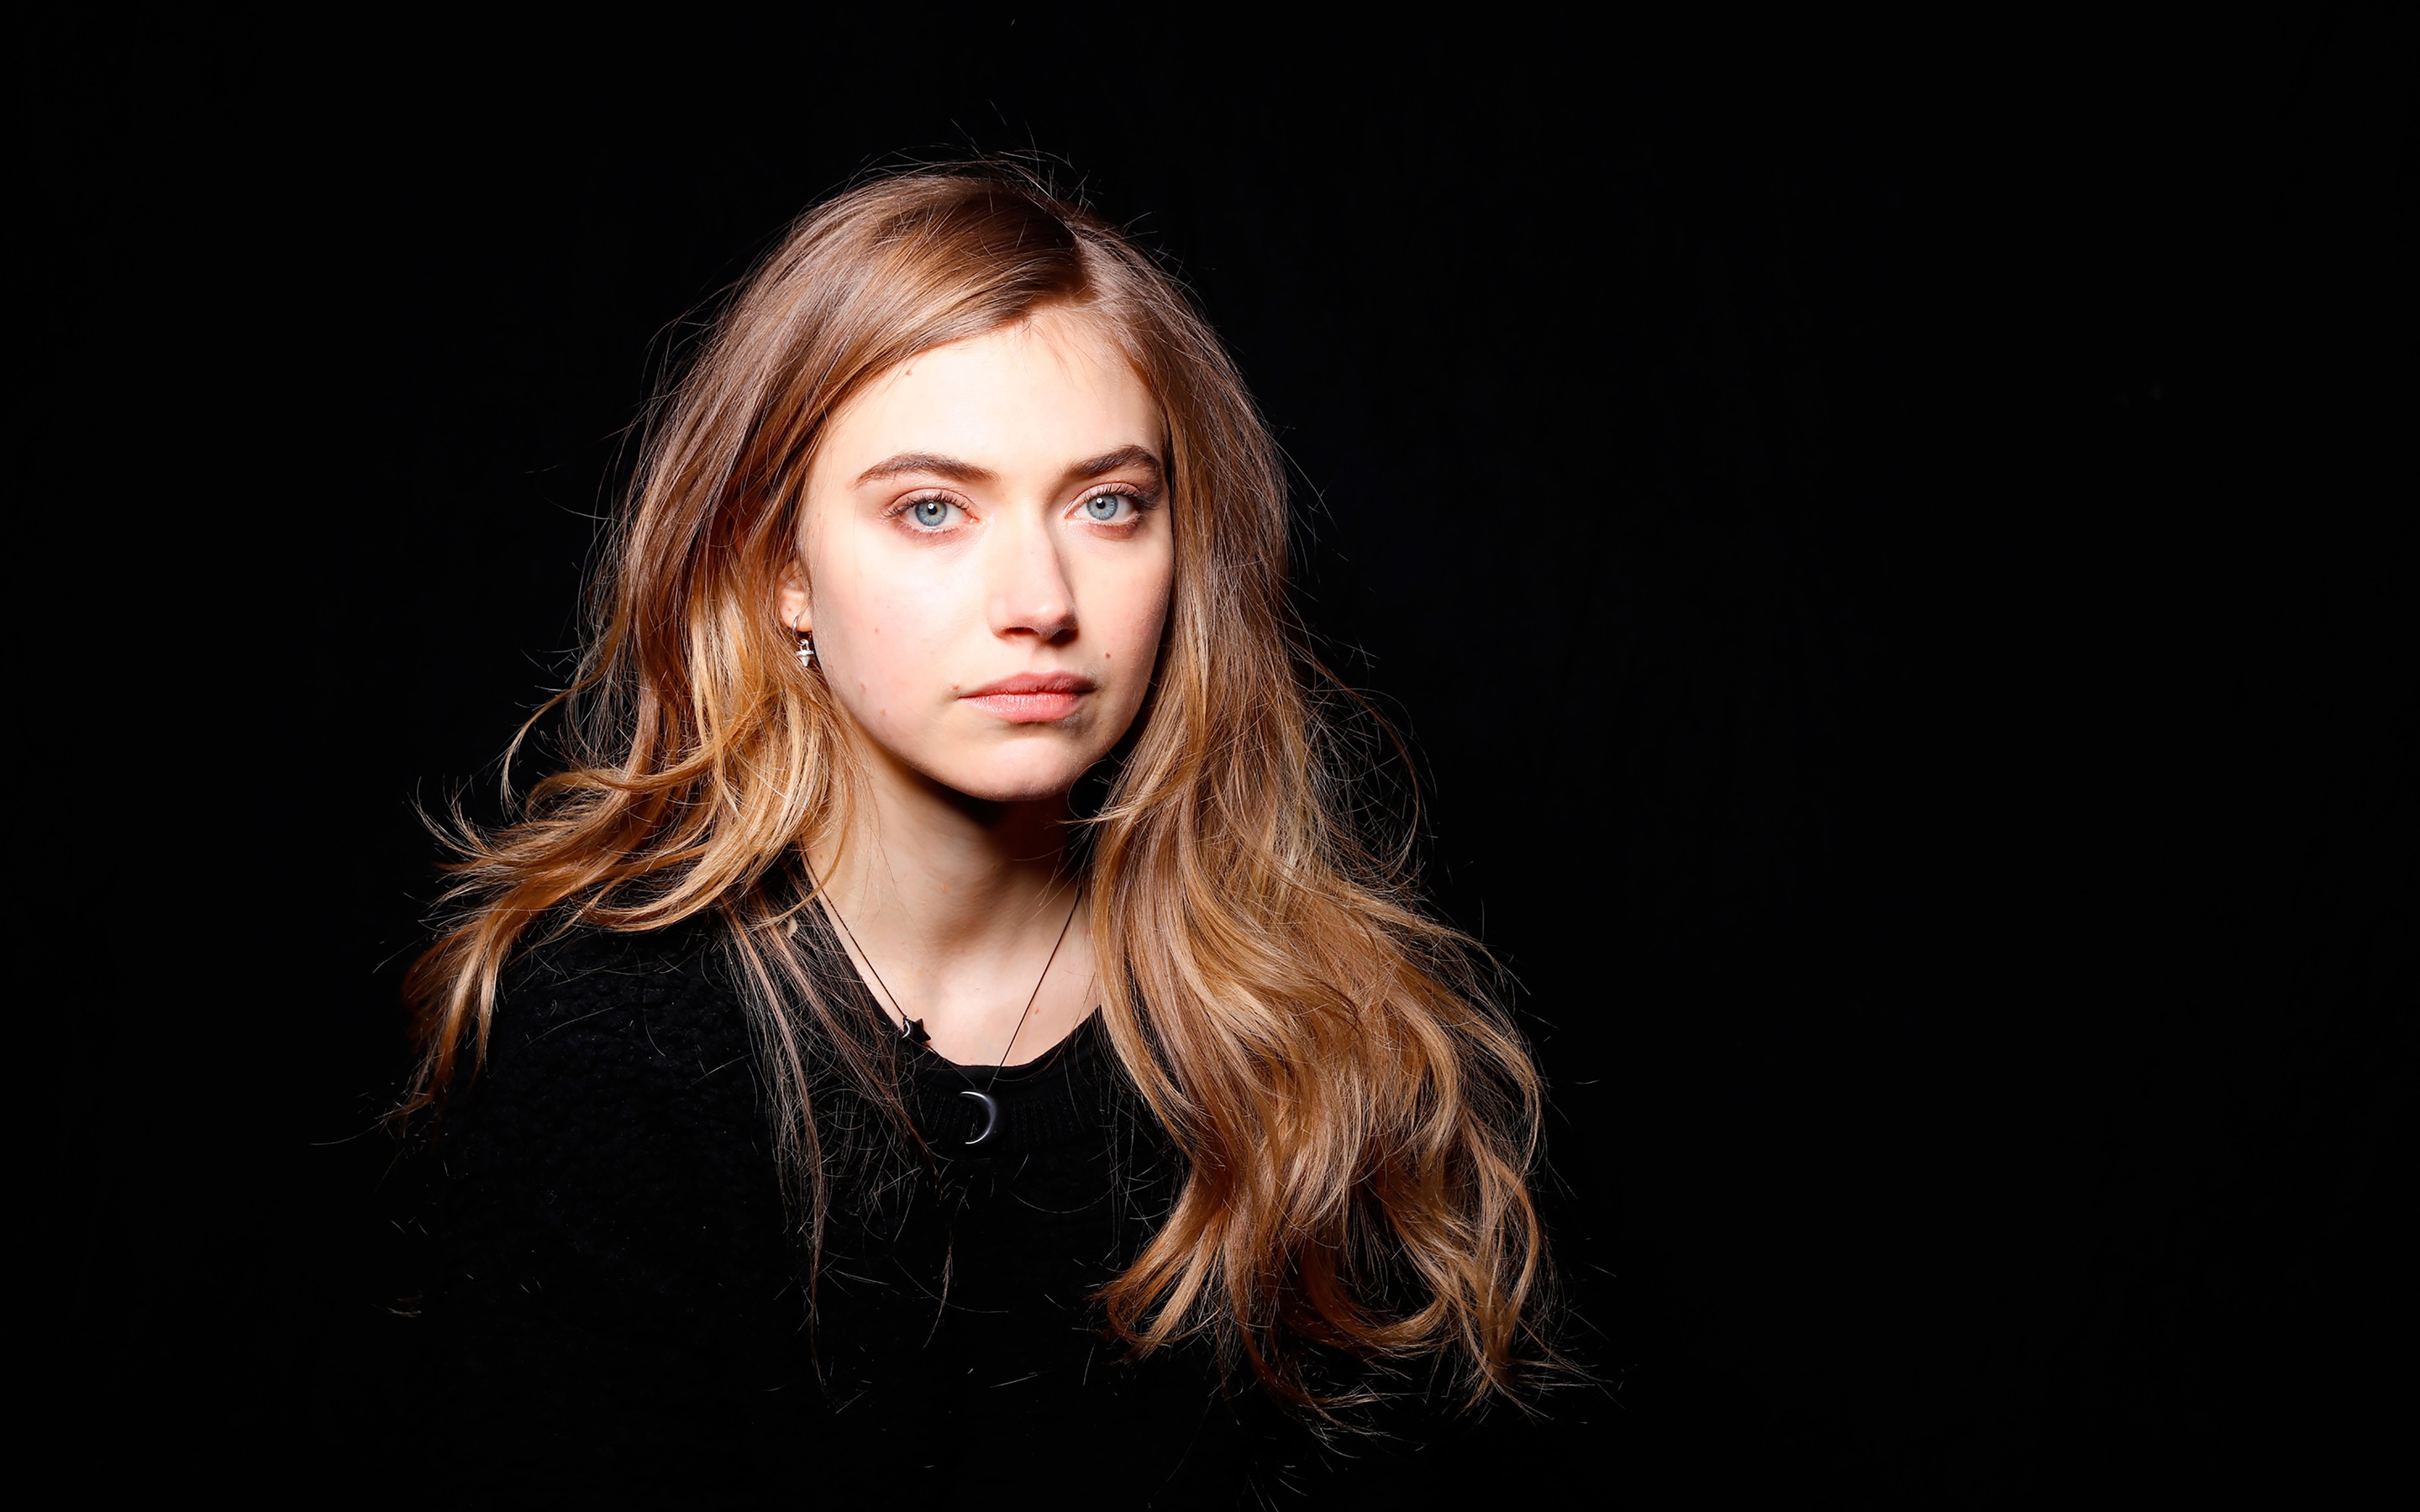 Imogen Poots Wallpaper Image Photos Pictures Background